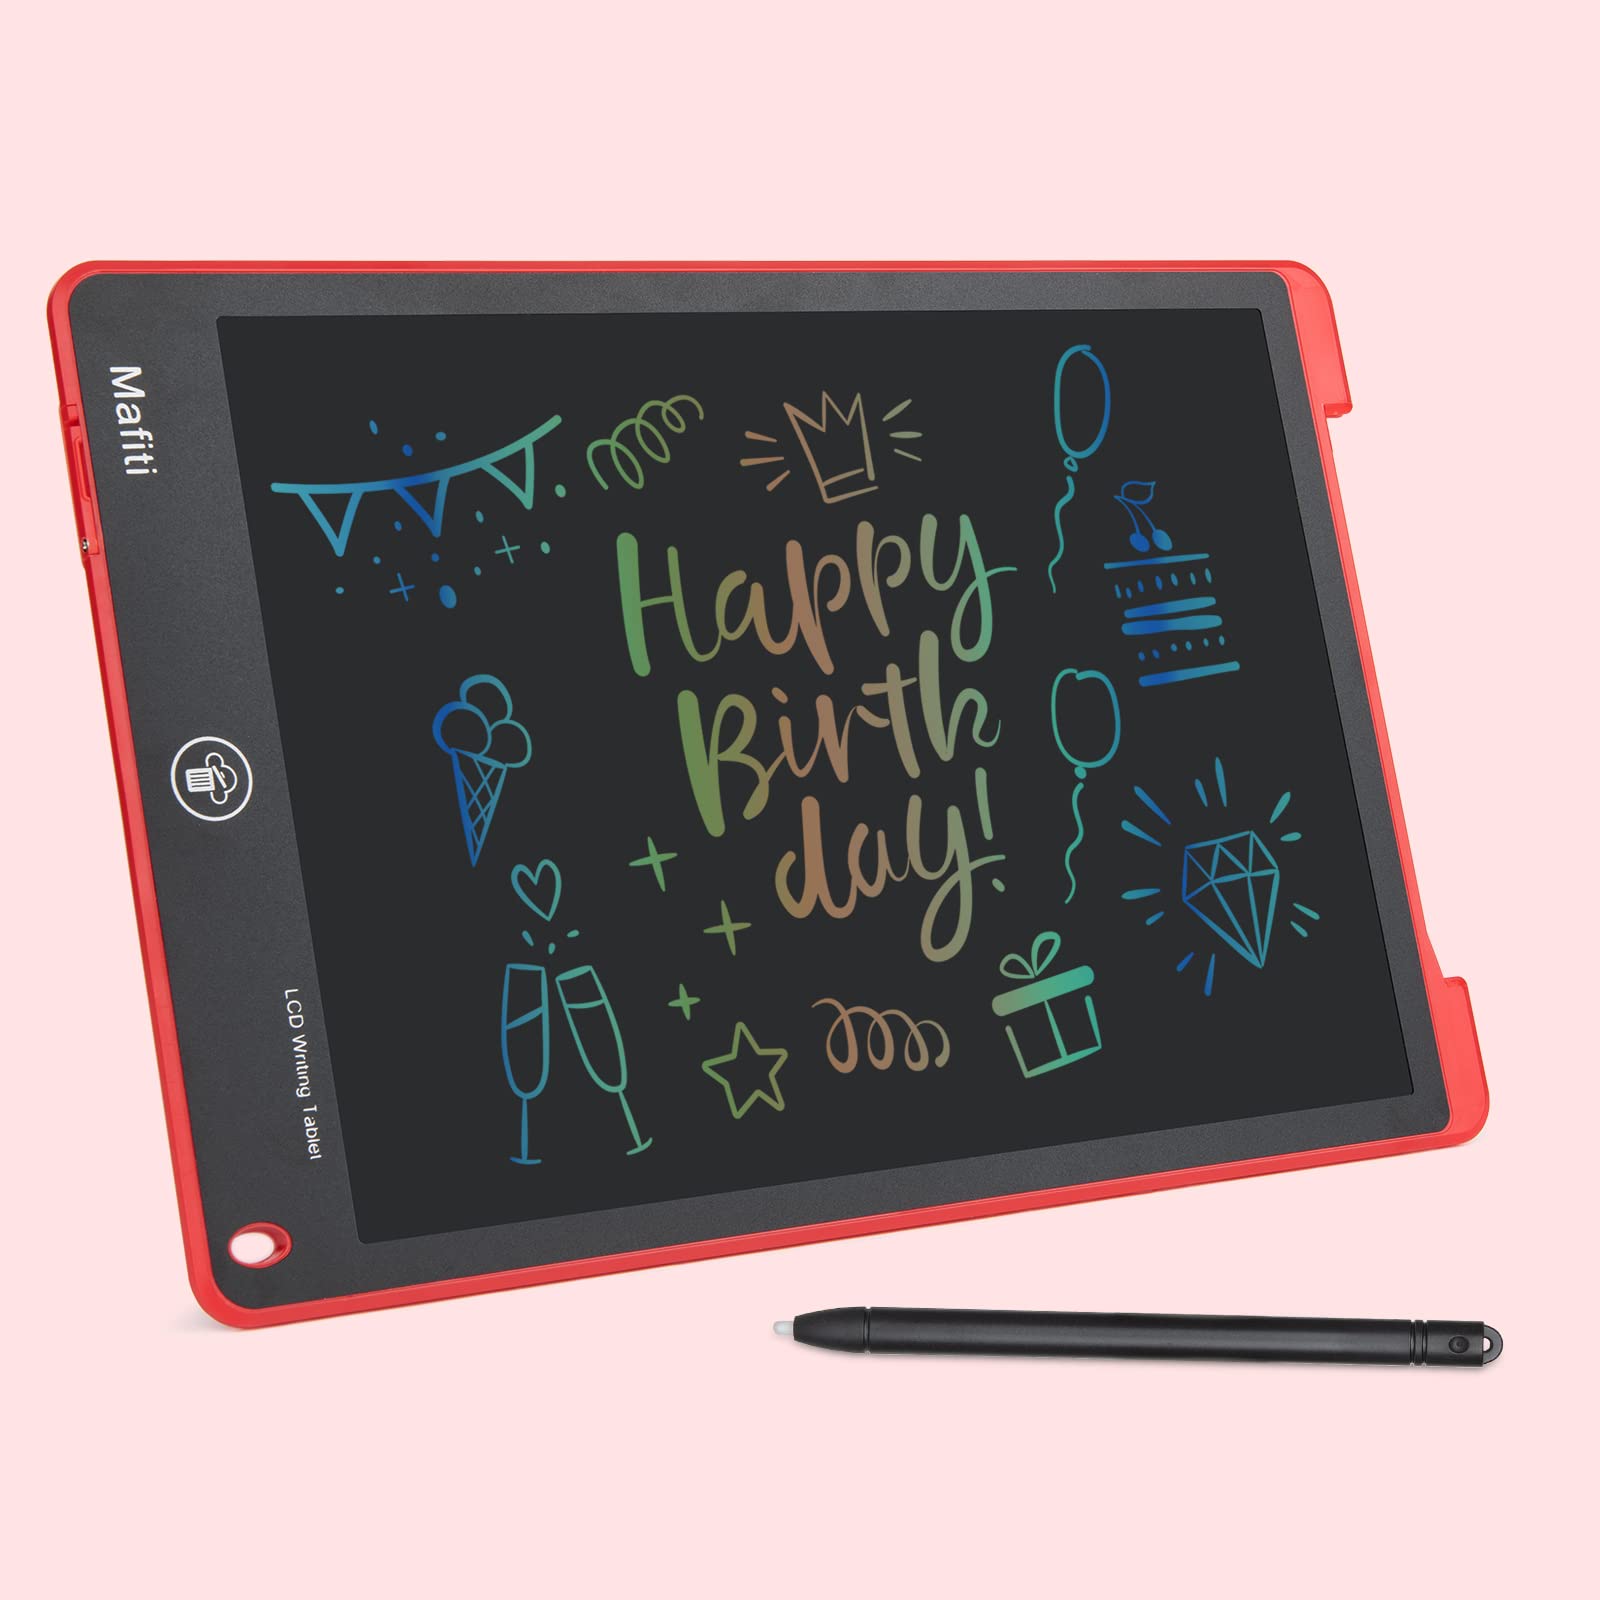 Mafiti LCD Writing Tablet 12 Inch Colorful Electronic Writing Drawing Pads  Doodle Board for Kids Boys Girls Red with Folio Cardboard Protective Case